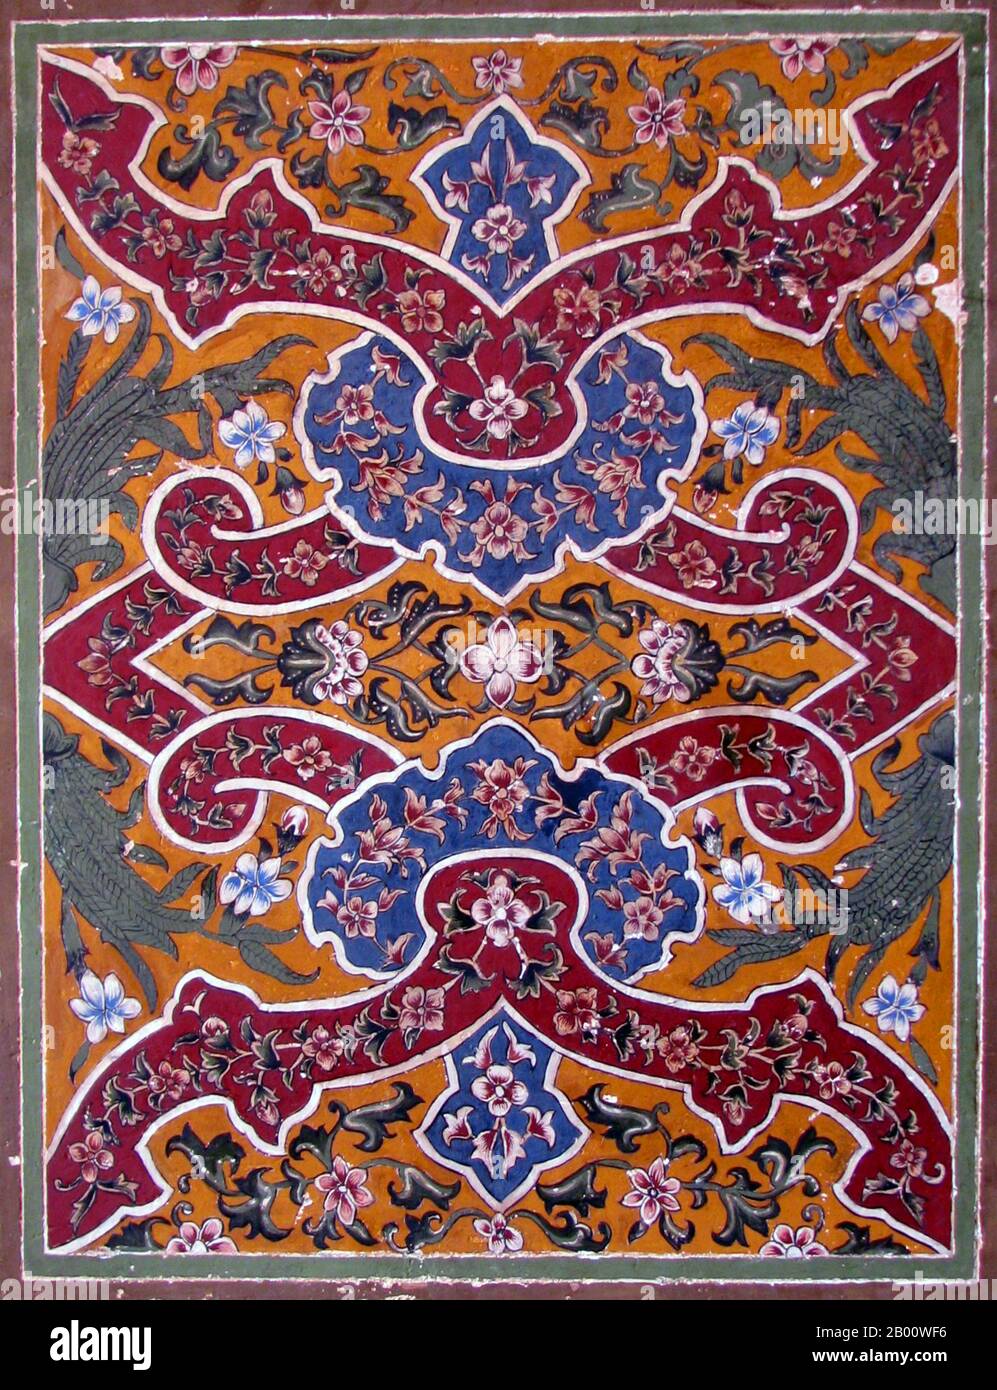 Pakistan: Arabesque, Wazir Khan Mosque, Lahore. Photo by Atif Gulzar (CC BY-SA 3.0 License).  The Wazir Khan Mosque (Masjid Wazir Khan) in Lahore, Pakistan, is celebrated for its extensive faience tile work. It has been described as 'a beauty spot on the cheek of Lahore'. It was built in seven years, starting around 1634-1635, during the reign of the Mughal Emperor Shah Jahan. It was built by Shaikh Ilm-ud-din Ansari, a native of Chiniot, who rose to be the court physician to Shah Jahan and later, the Governor of Lahore. He was commonly known as Wazir Khan. Stock Photo